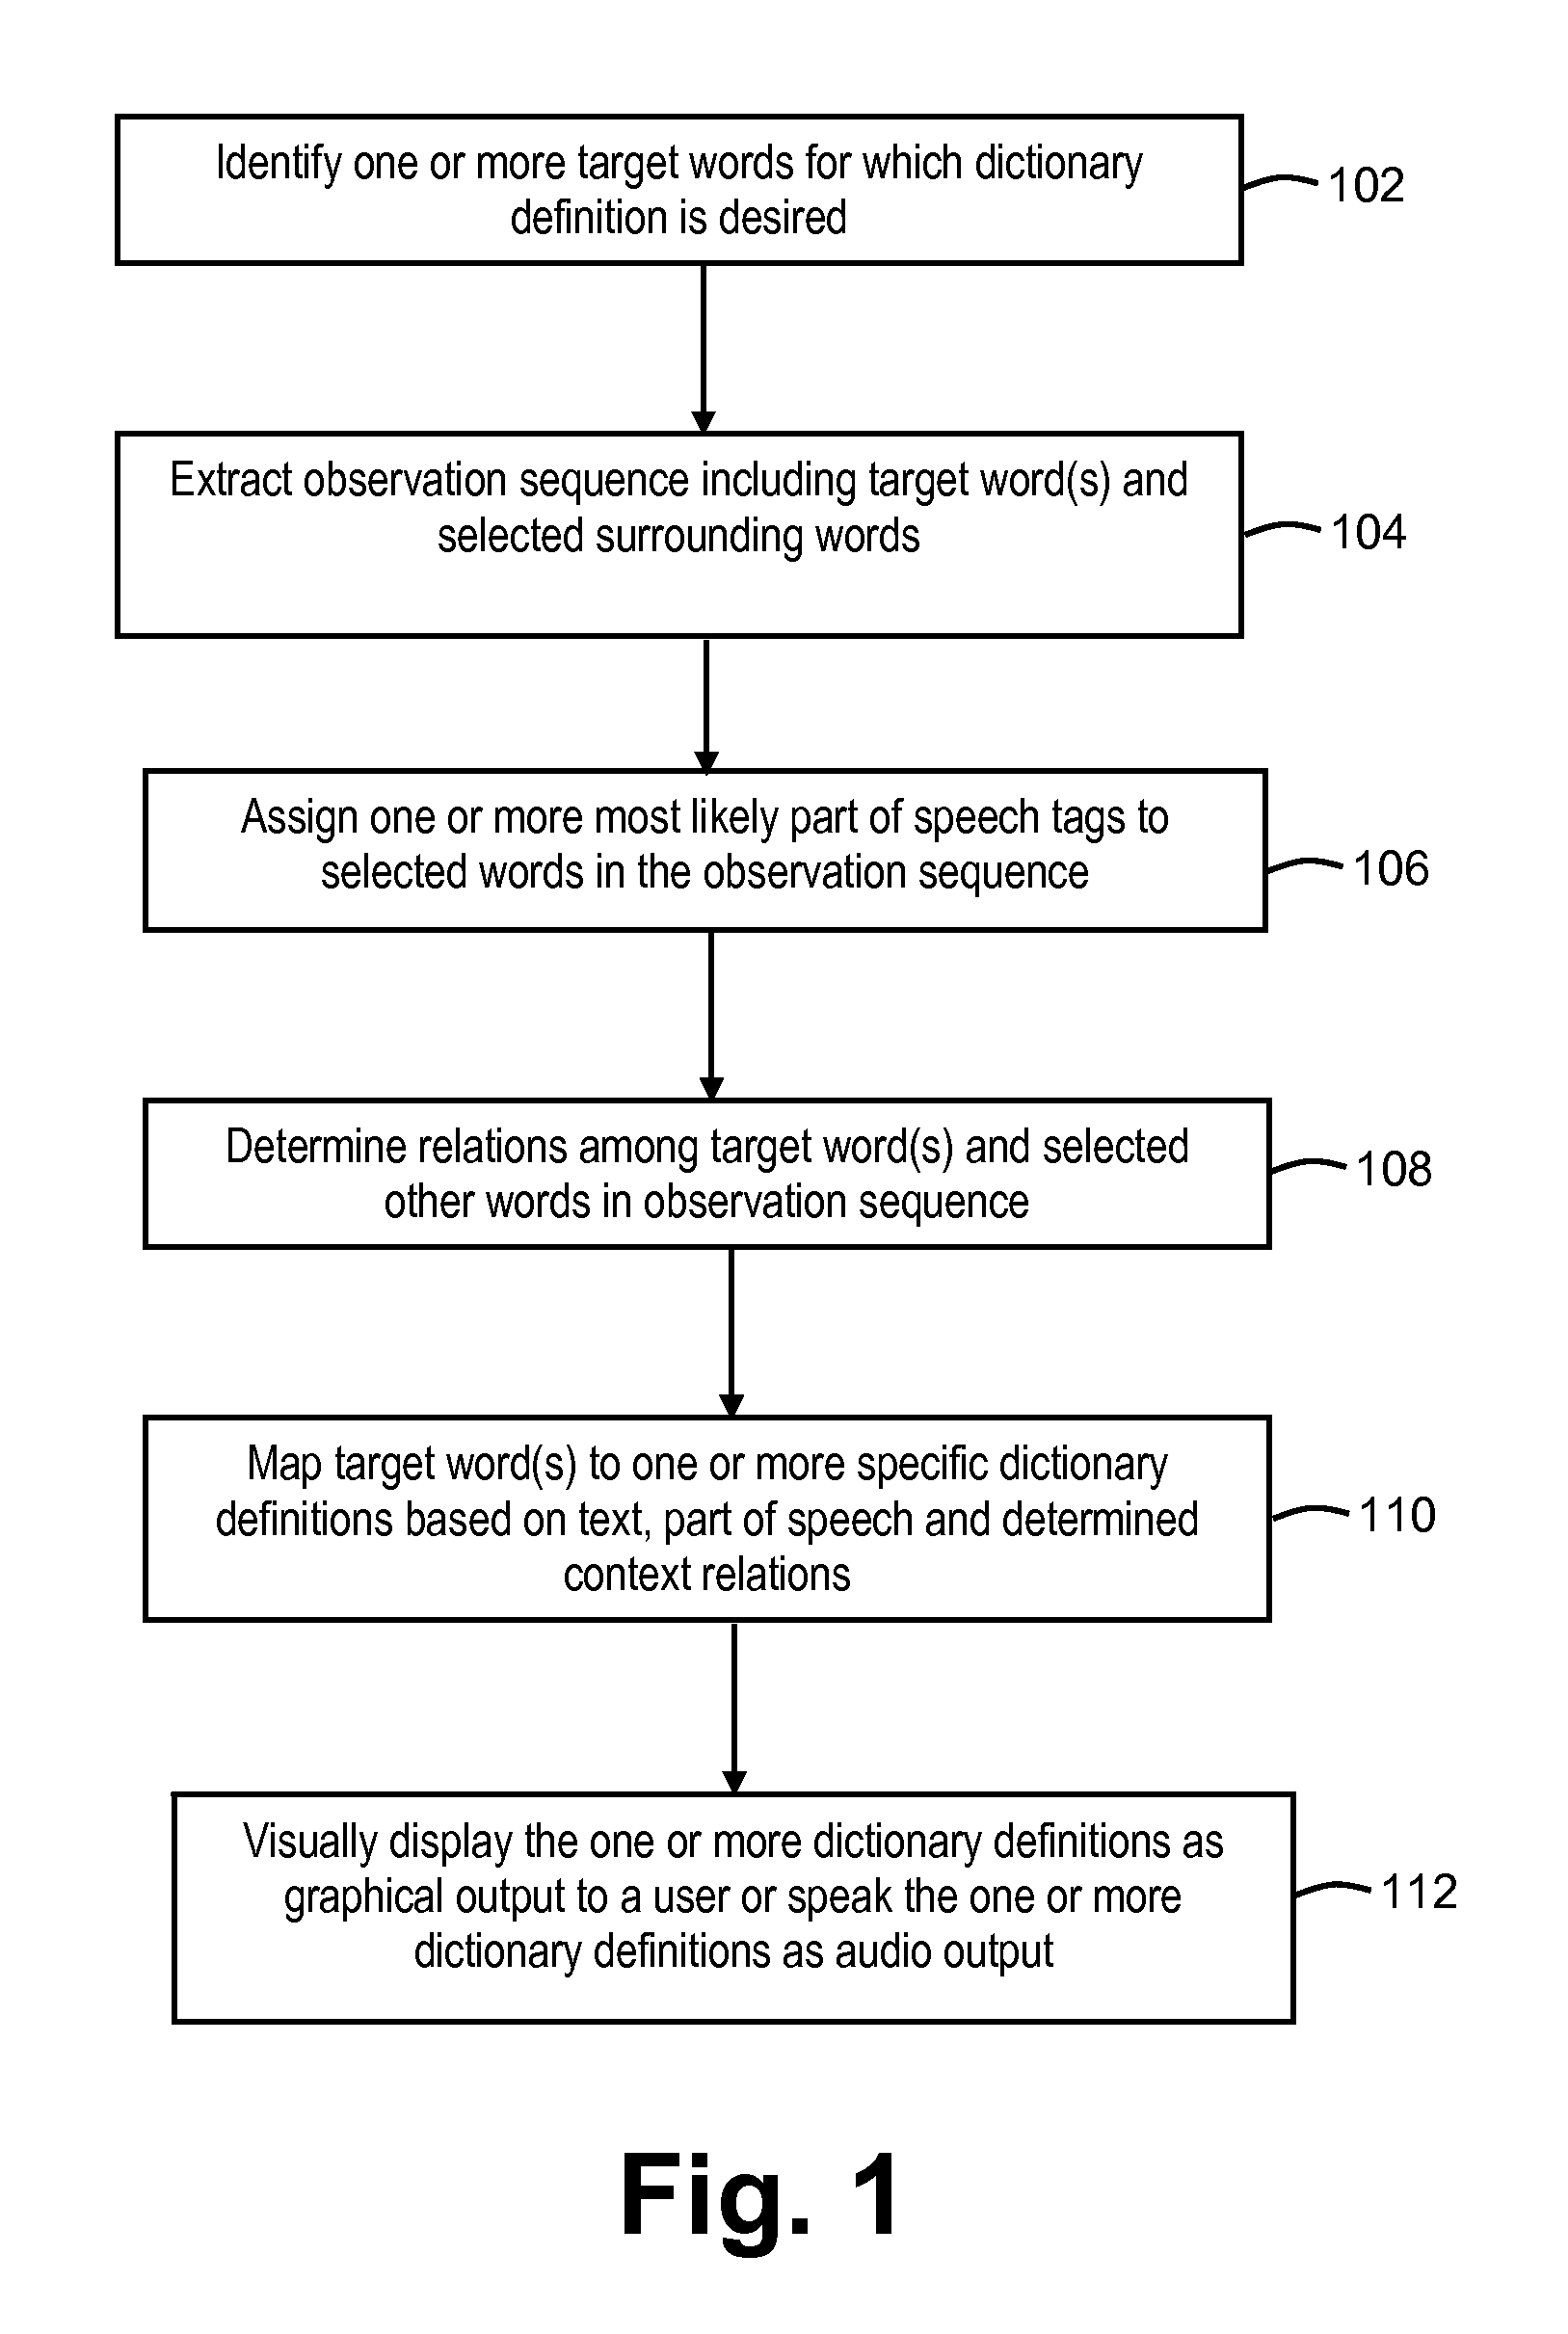 System and method of disambiguating and selecting dictionary definitions for one or more target words